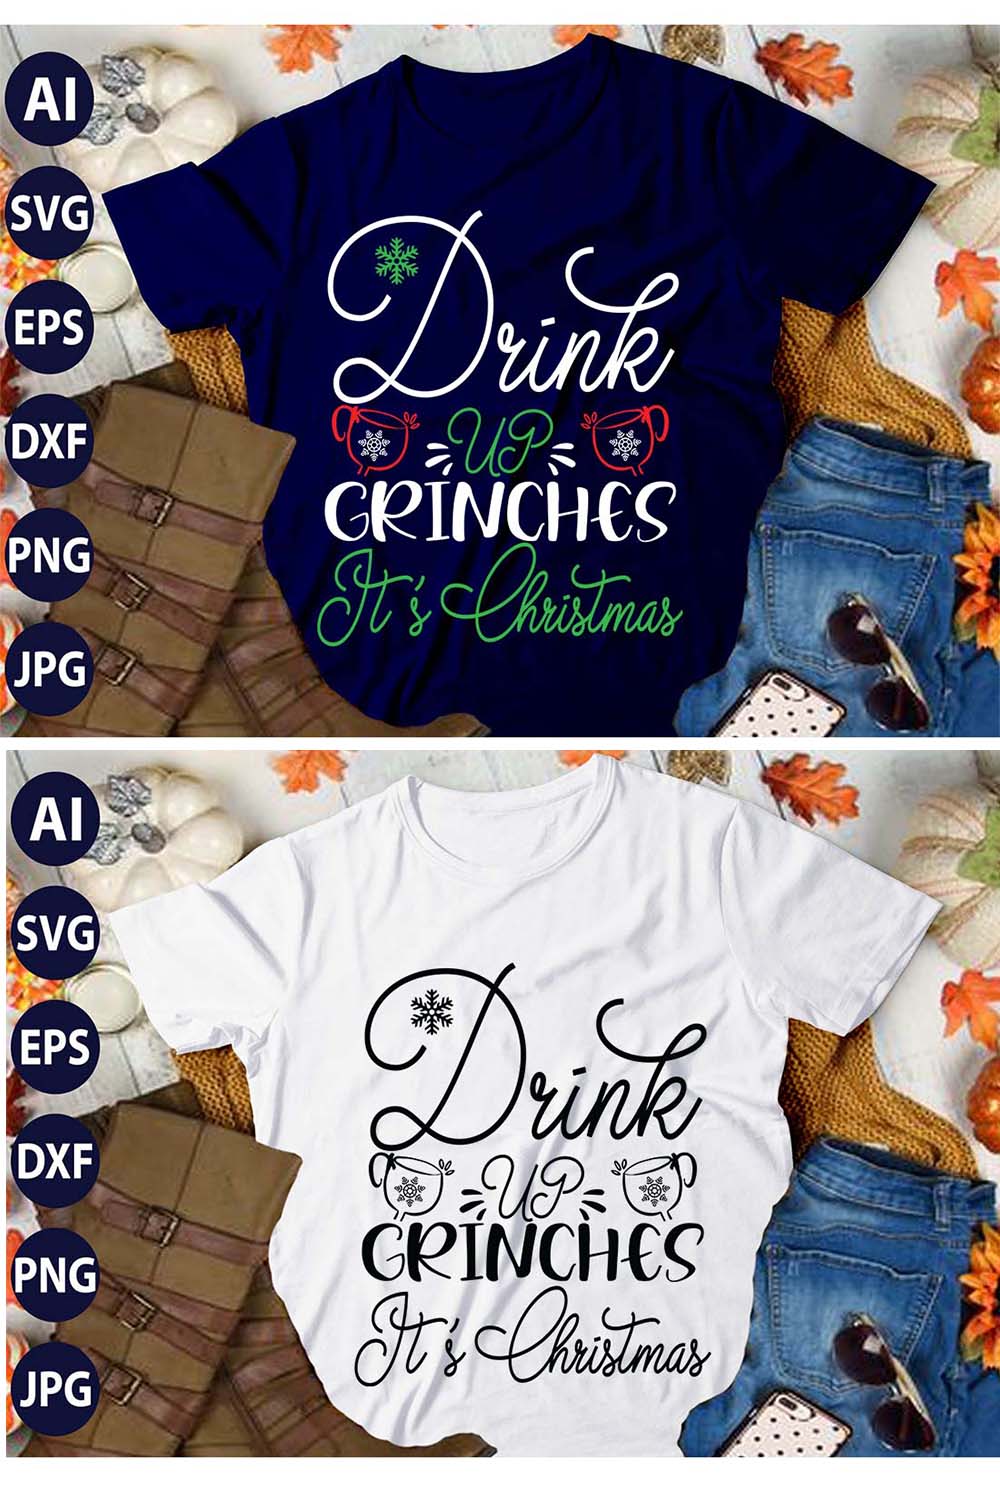 Drink UP Grenache It's Christmas, SVG T-Shirt Design |Christmas Retro It's All About Jesus Typography T-shirt Design | Ai, Svg, Eps, Dxf, Jpeg, Png, Instant download T-Shirt | 100% print-ready Digital vector file pinterest preview image.